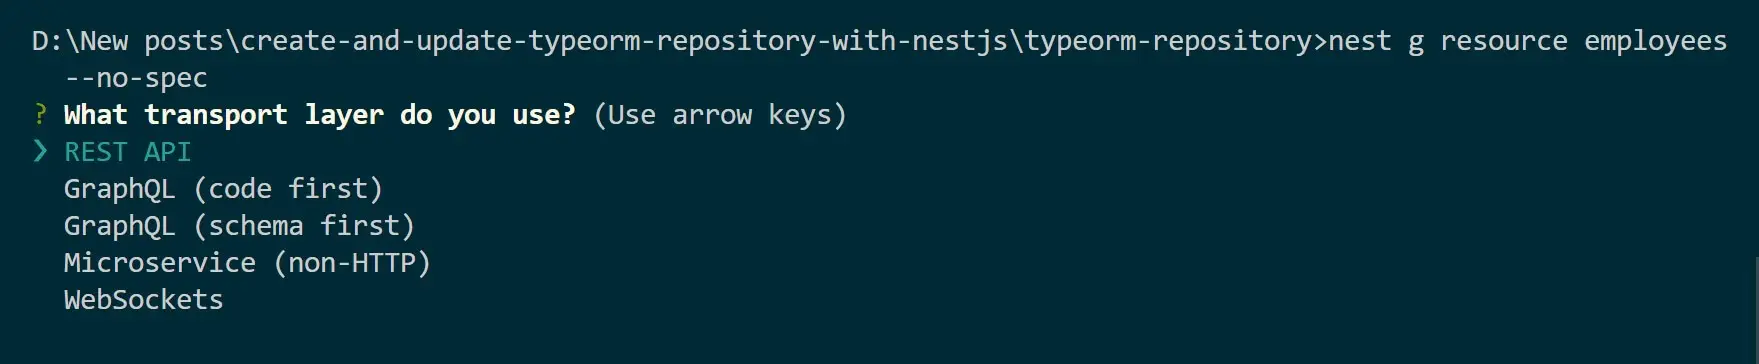 How to Create and Update TypeORM Repository with Nest.js